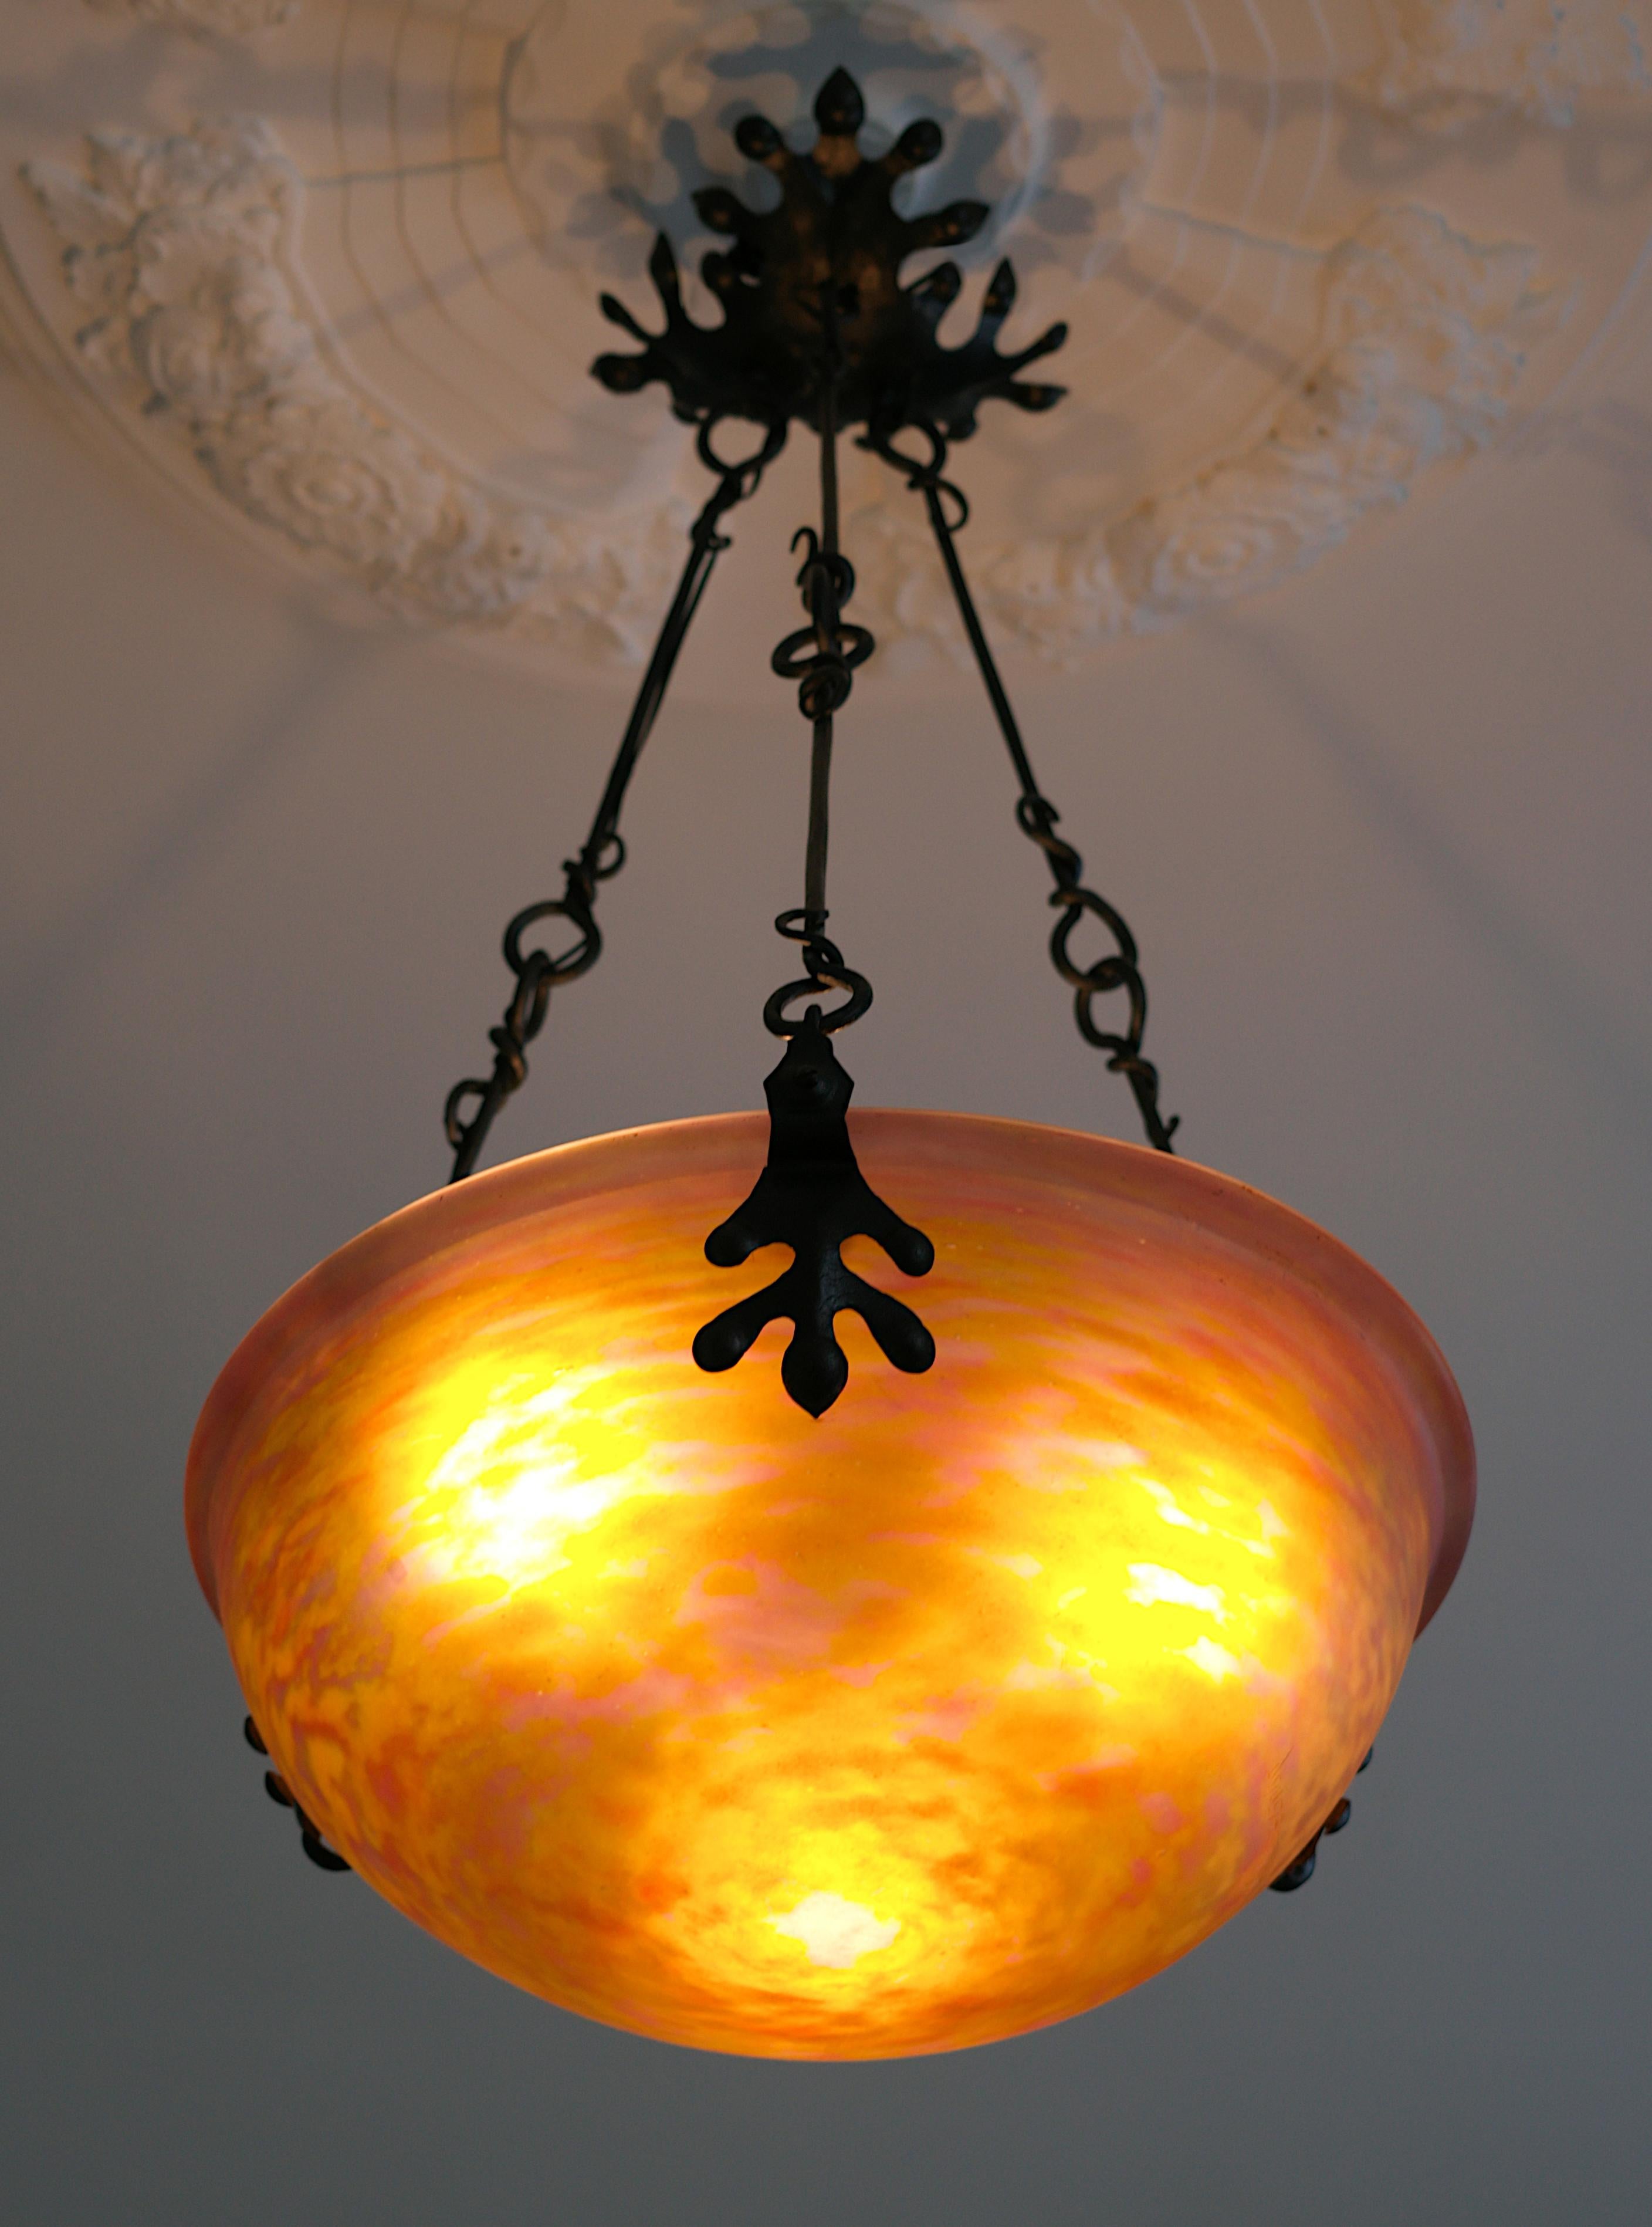 French Art Nouveau - Art Deco pendant chandelier by DAUM (Nancy), France, 1910-1915. New Style - Transitional period between Art Nouveau and Art Deco. Blown double glass shade hung at its wrought-iron frame. Colors : pink and yellow. Height :